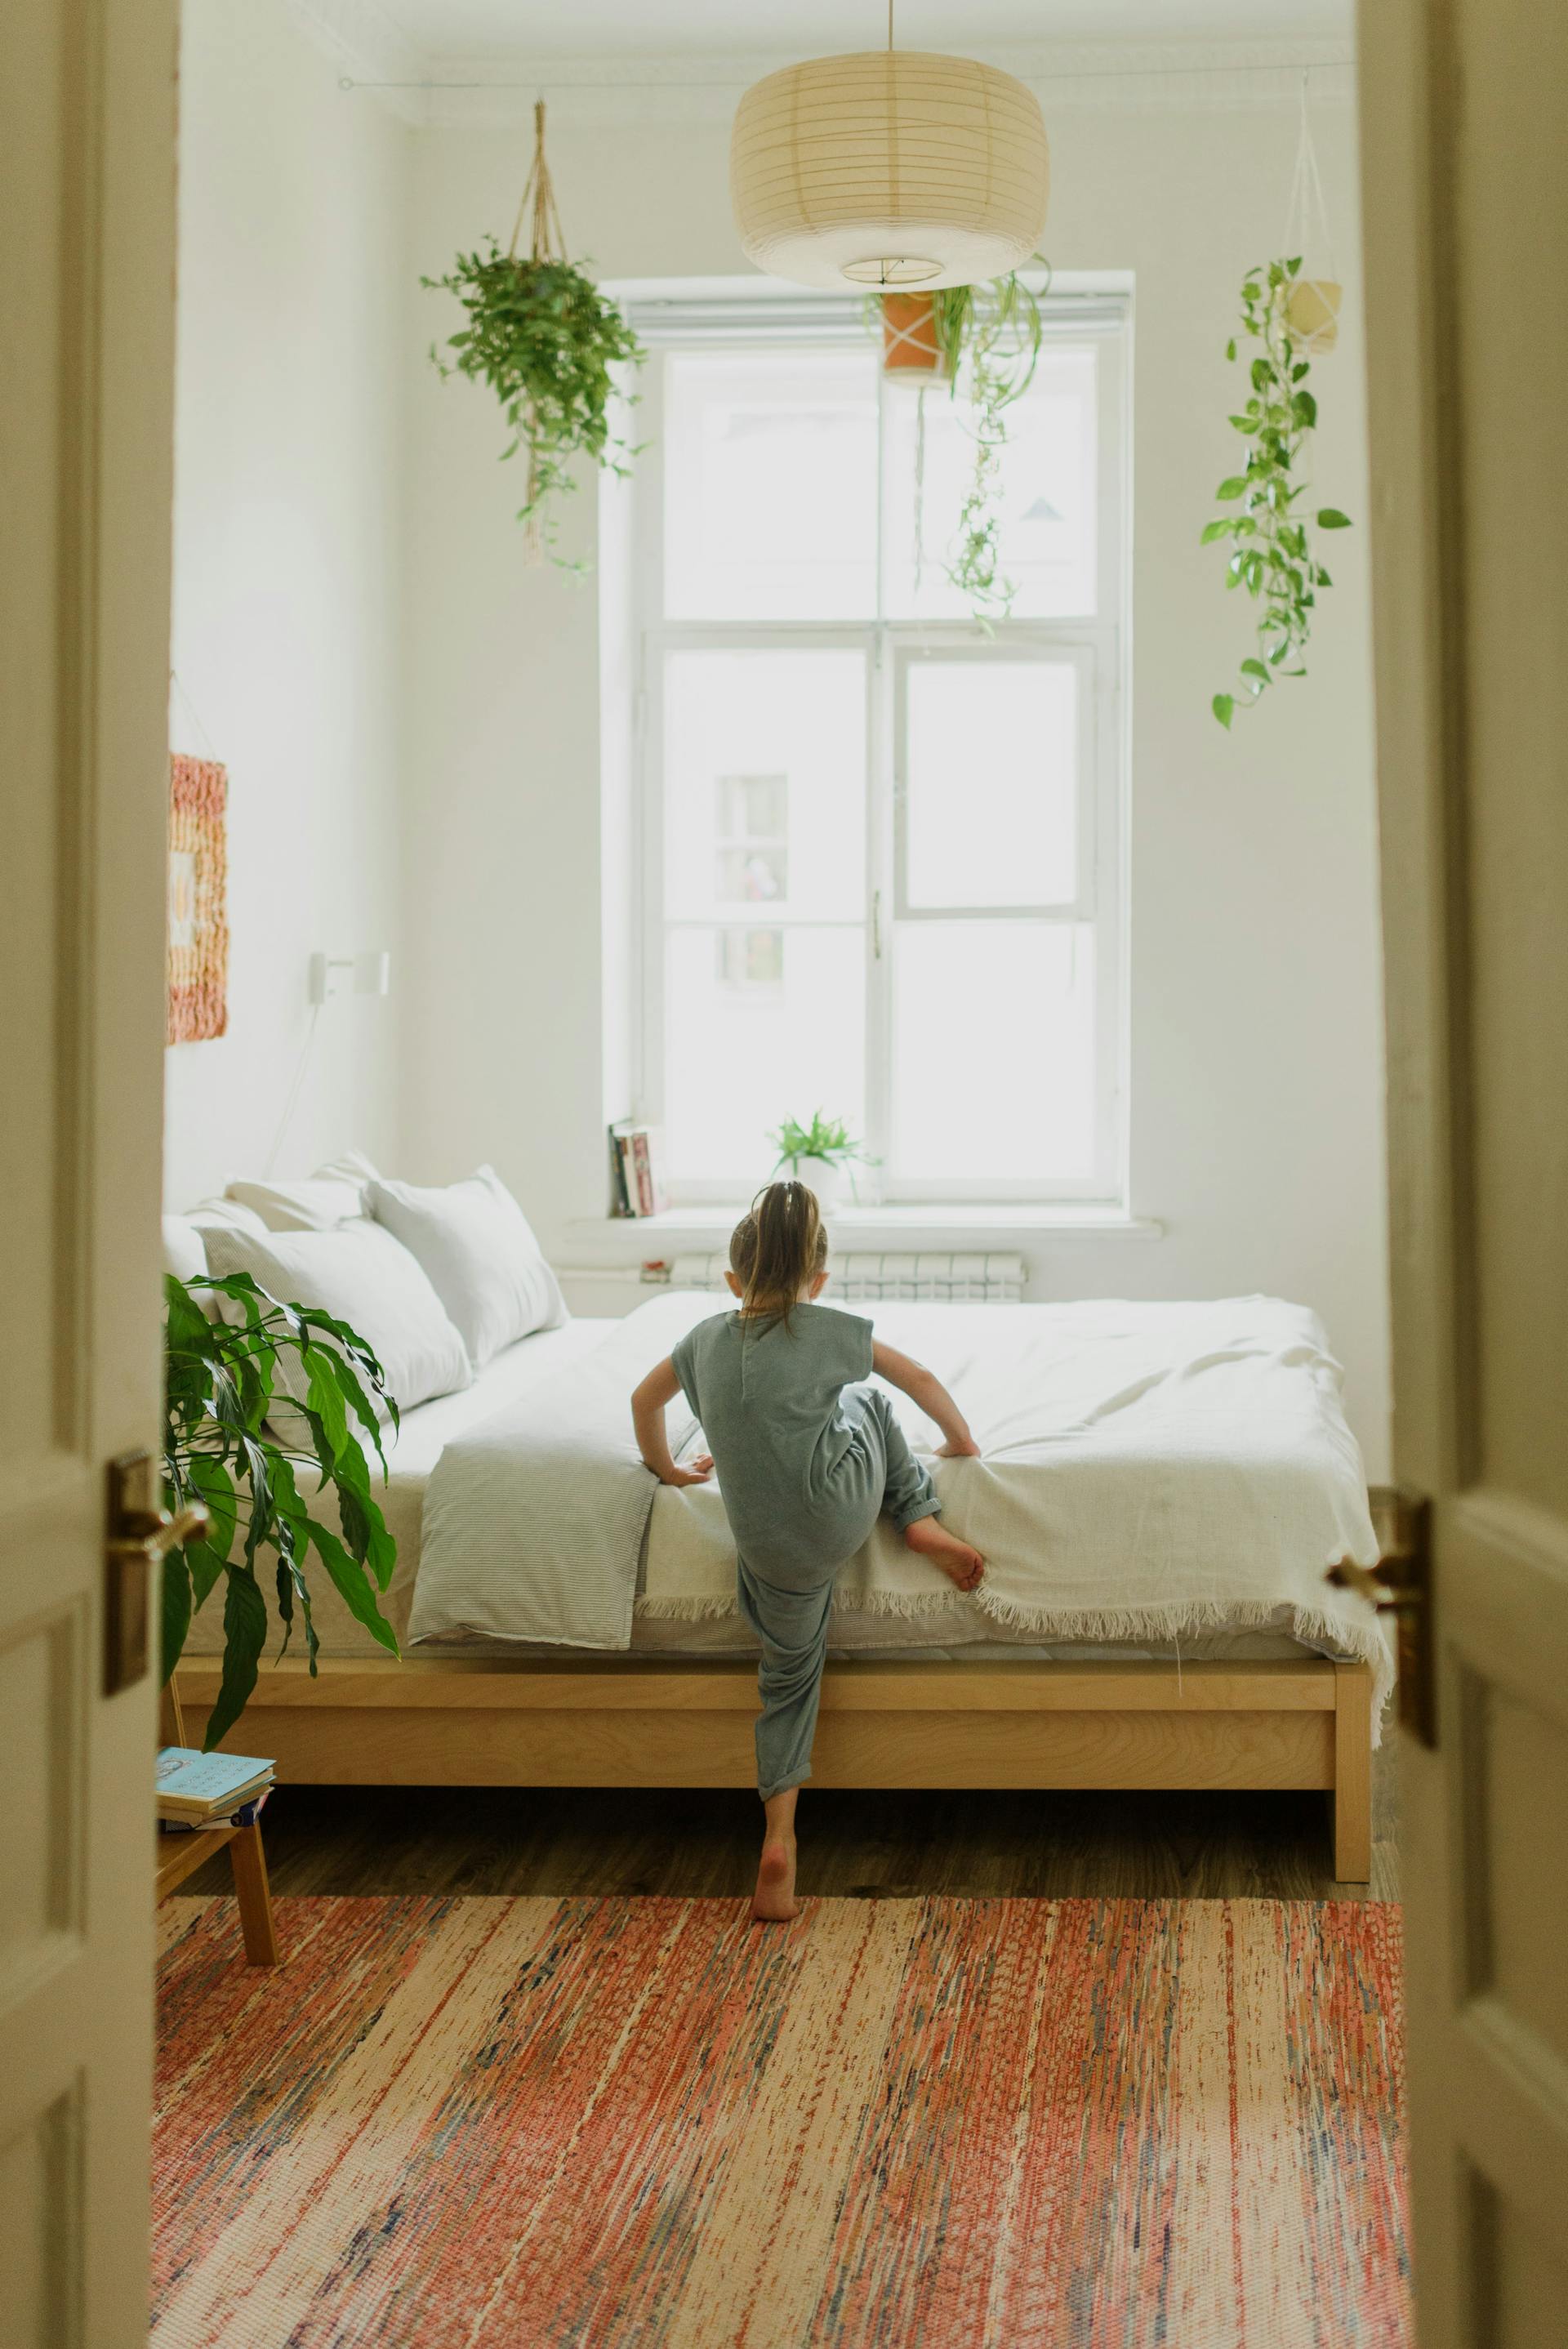 A little girl climbing into bed | Source: Pexels